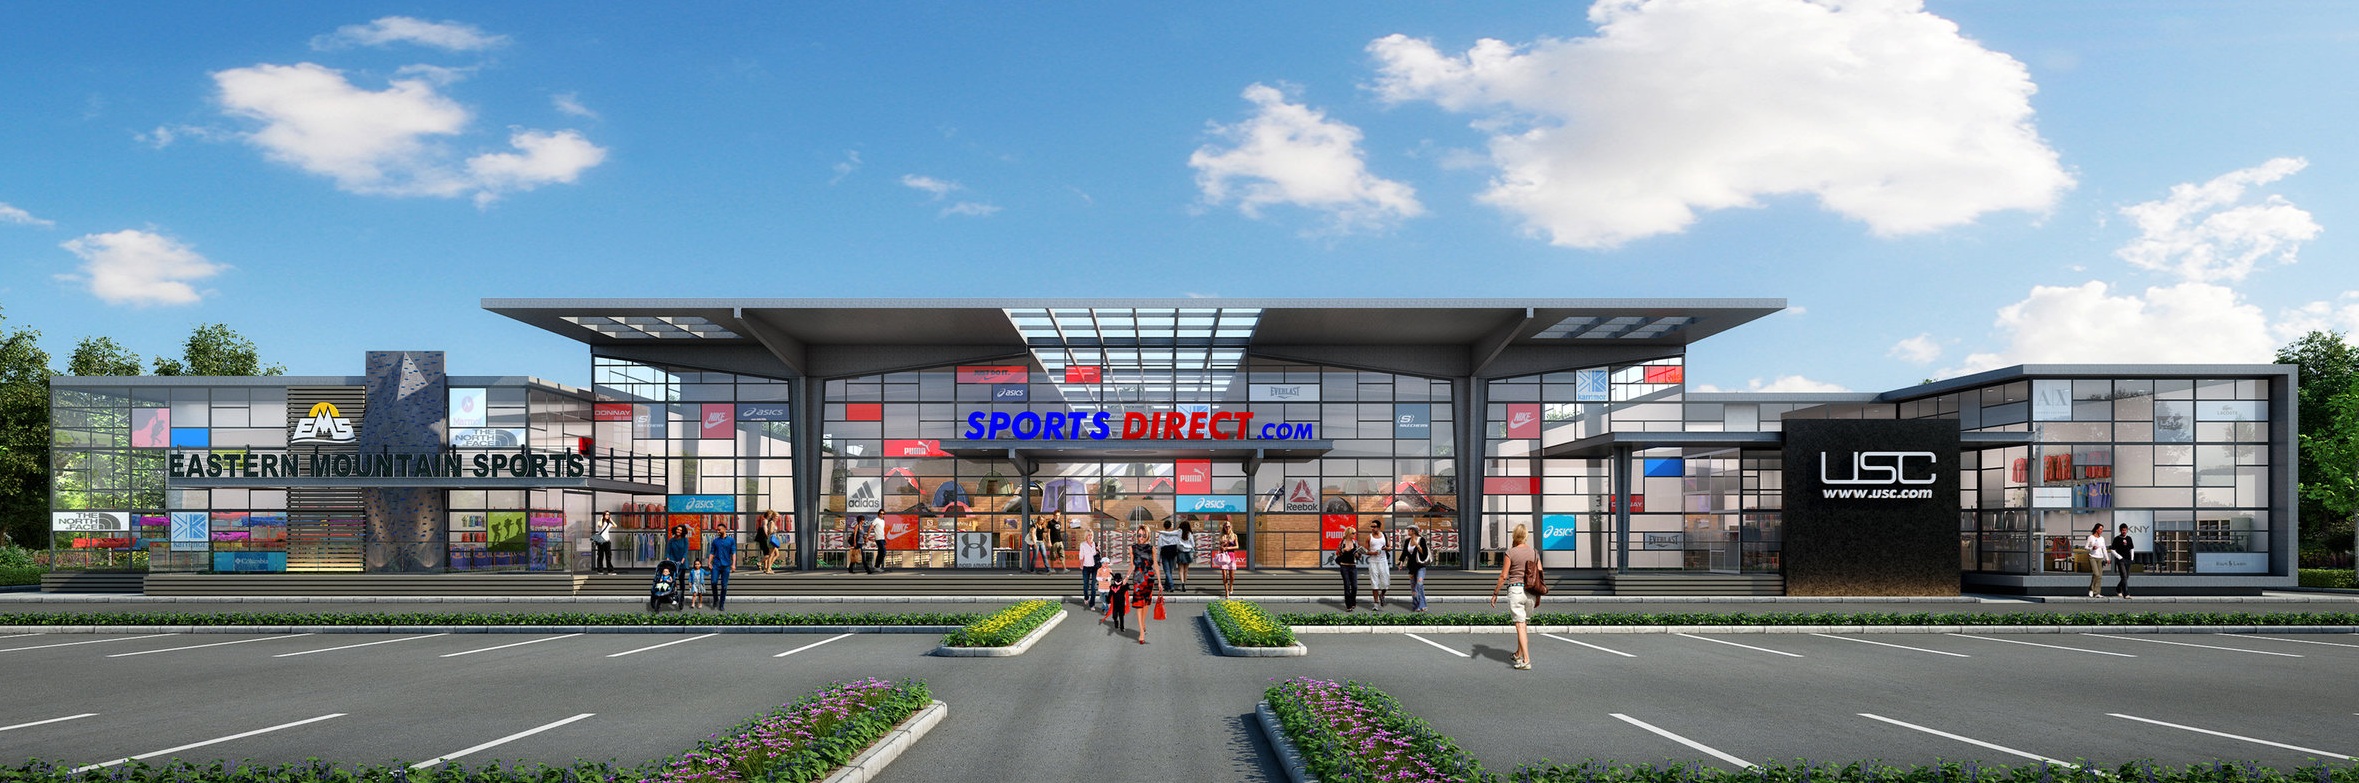 EMS_Sports Direct_USC - Exterior View 1.jpg